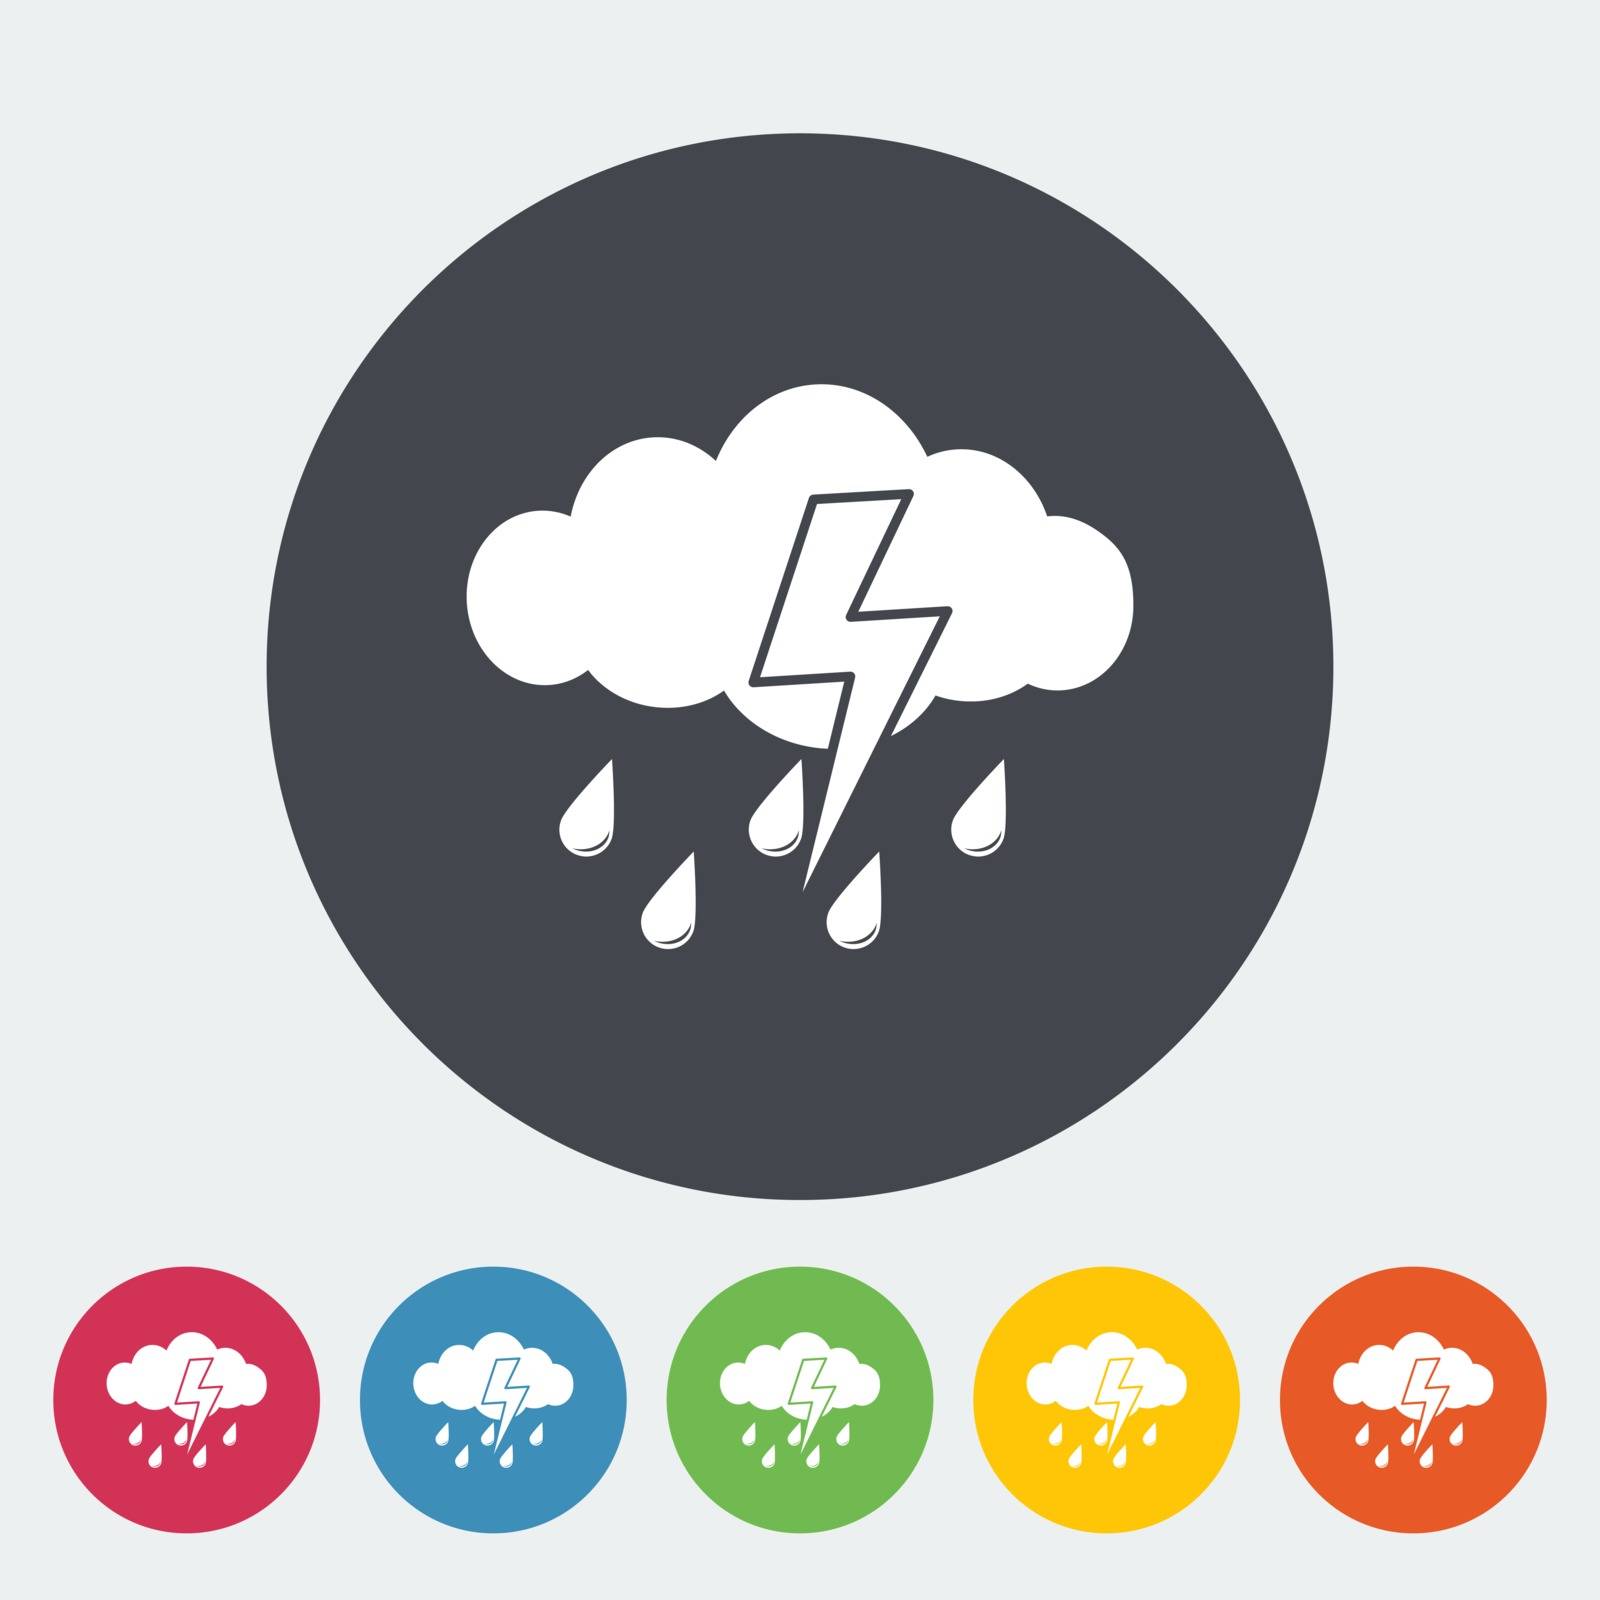 Storm. Single flat icon on the circle. Vector illustration.